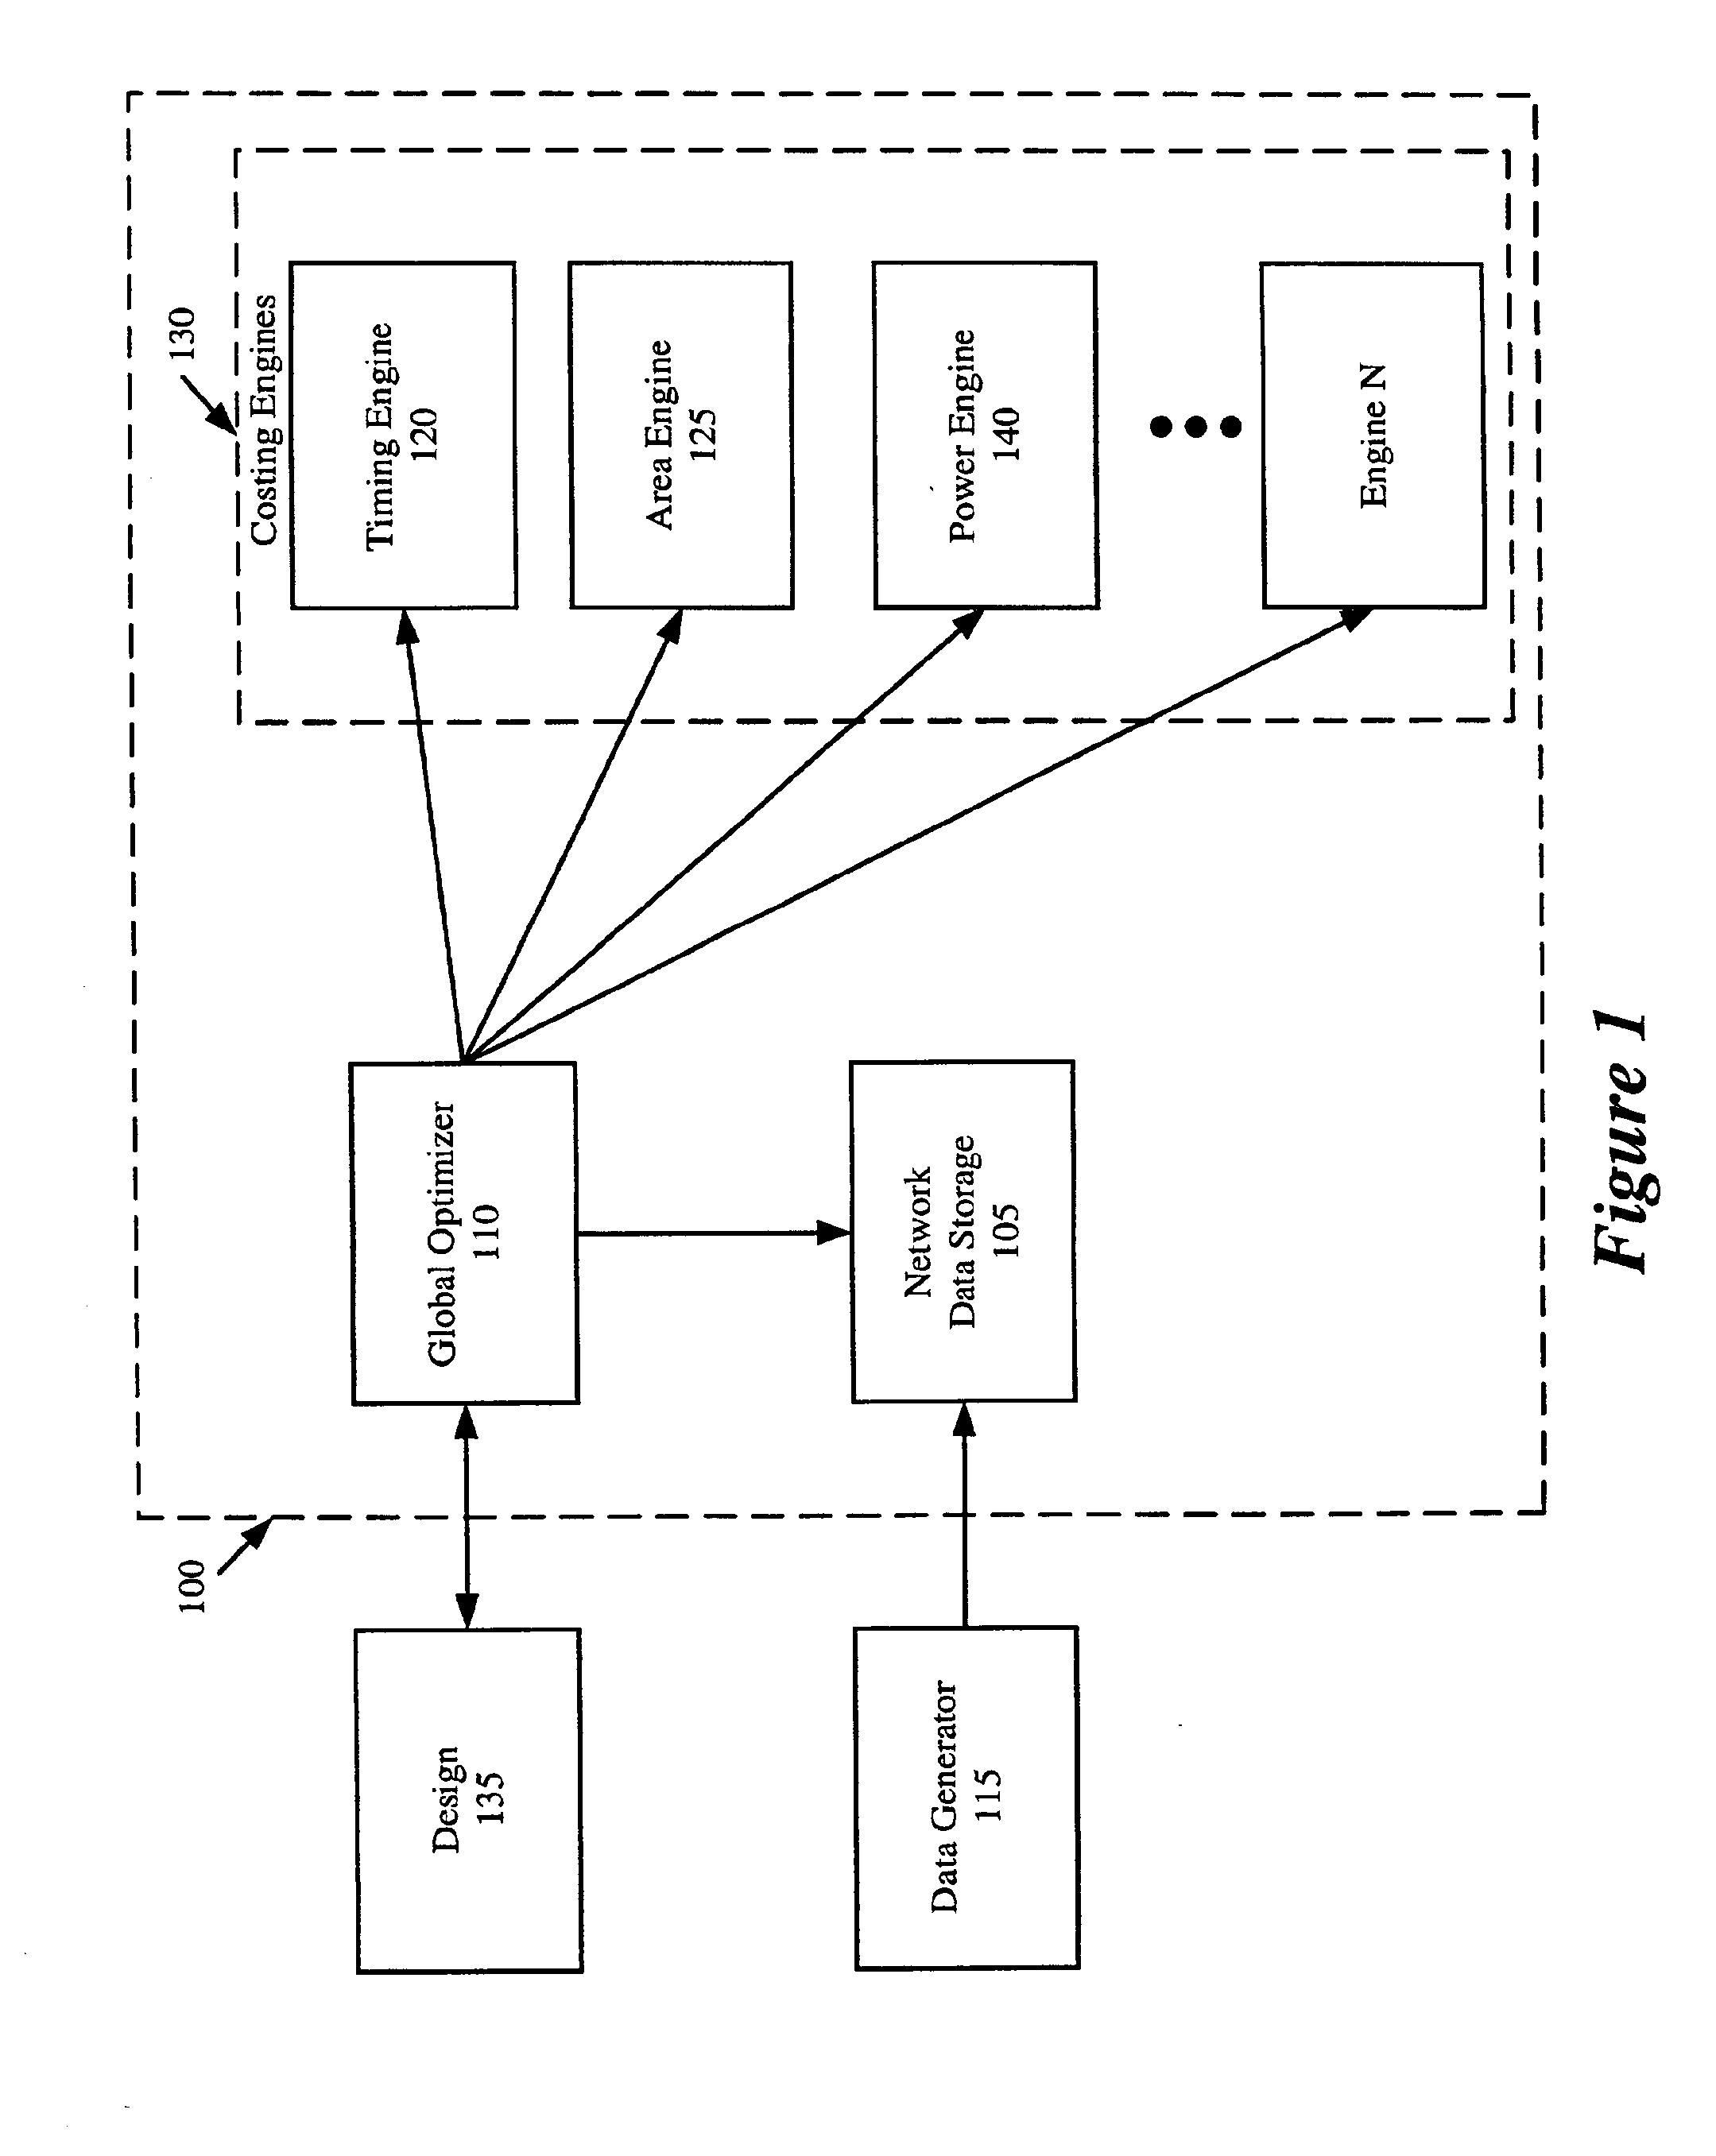 Method and apparatus for performing technology mapping